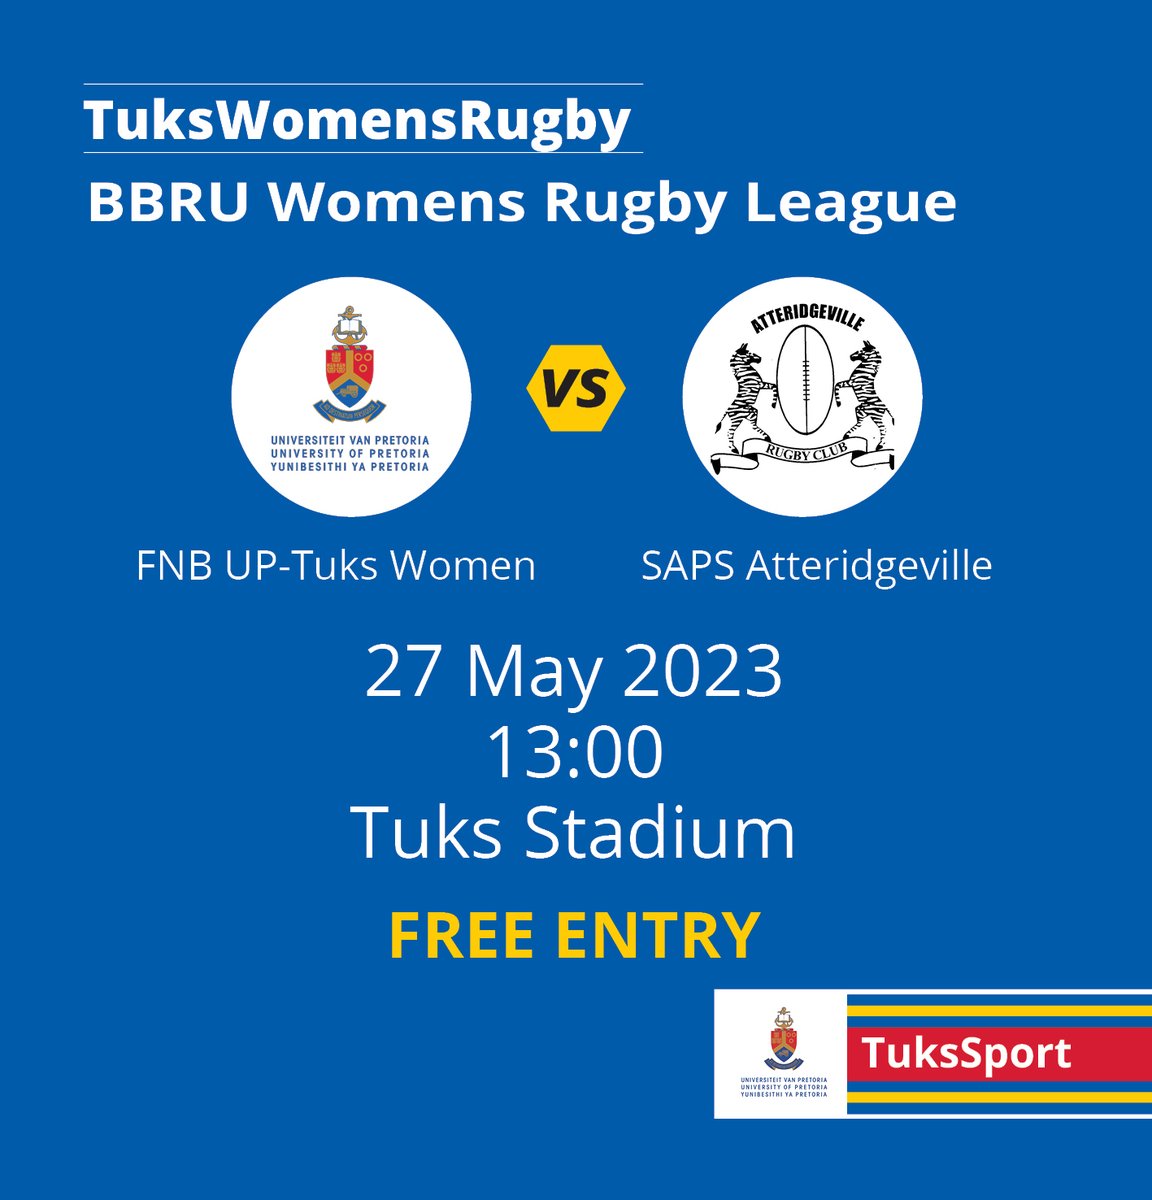 #TuksWomensRugby: MATCH OF THE 𝐖𝐄𝐄𝐊𝐄𝐍𝐃

🏆 BBRU Women's Rugby League
🏉 UP-Tuks vs SAPS Atteridgeville
🕖 1pm
🏟️ Tuks Stadium
🎫 FREE ENTRY

Important note: No alcoholic beverages and cooler boxes are allowed in the stadium

#Elevate2Greatness ⭐️💡
#StripeGeneration 🔴🔵⚪